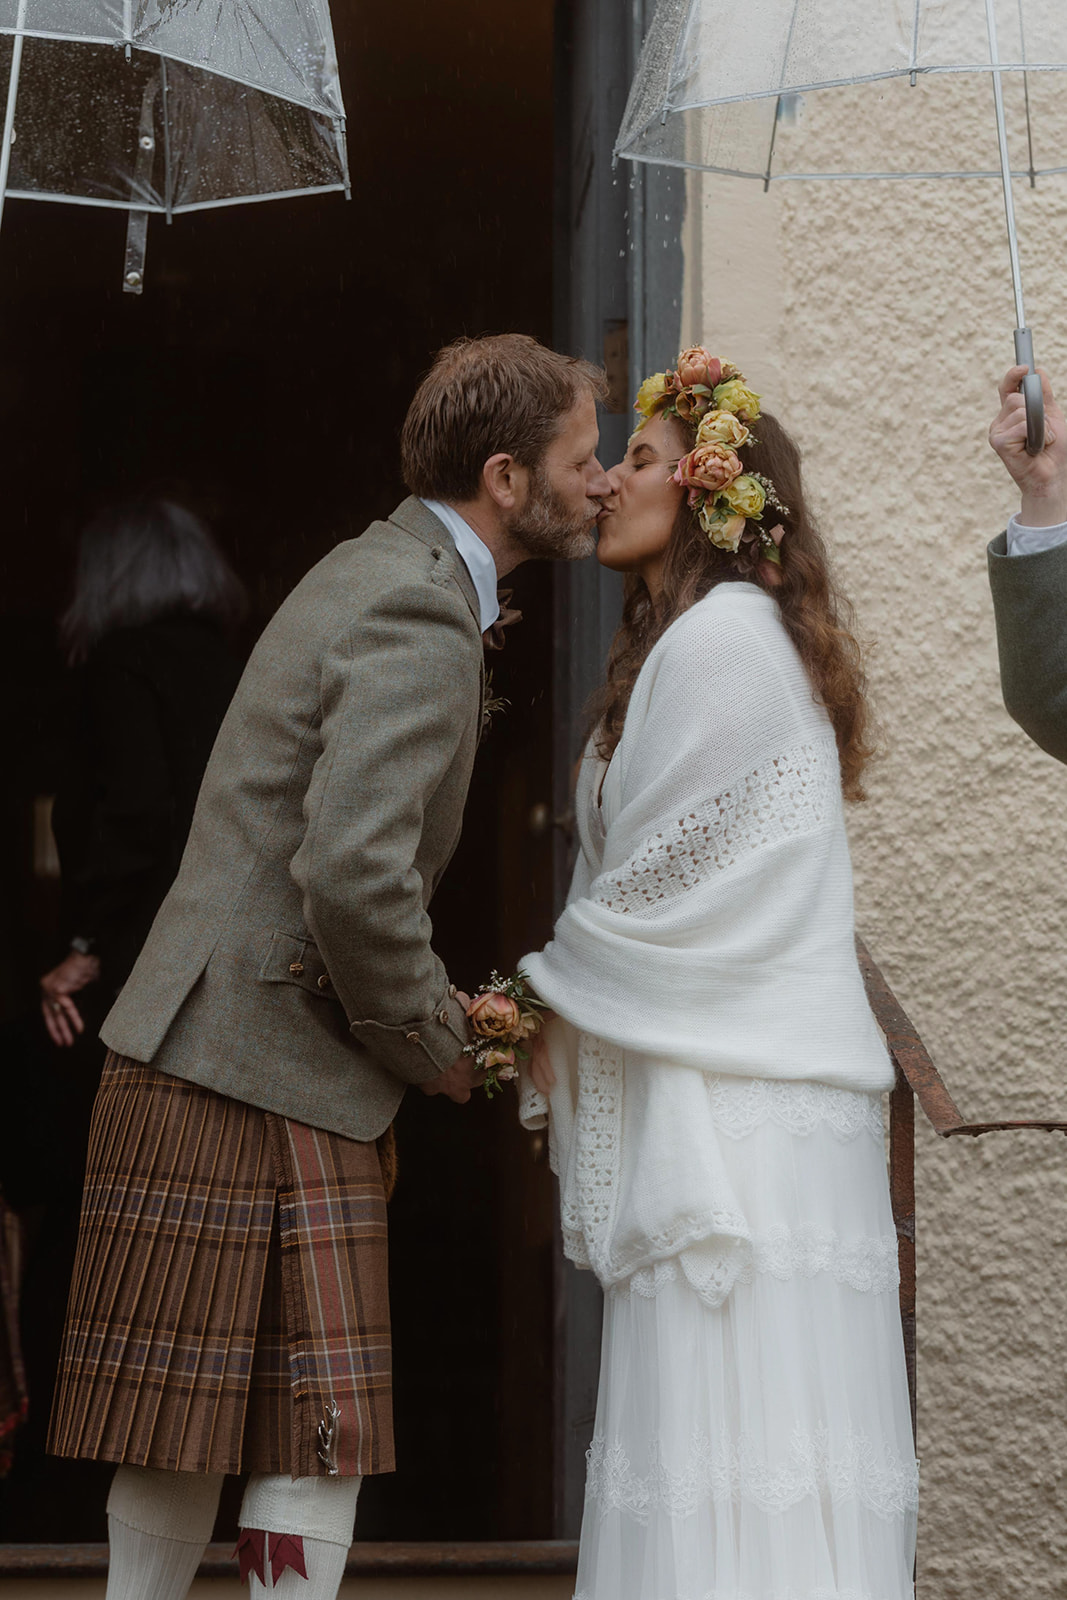 Rebecca and Simon shared a romantic kiss during their Isle of Skye elopement ceremony.